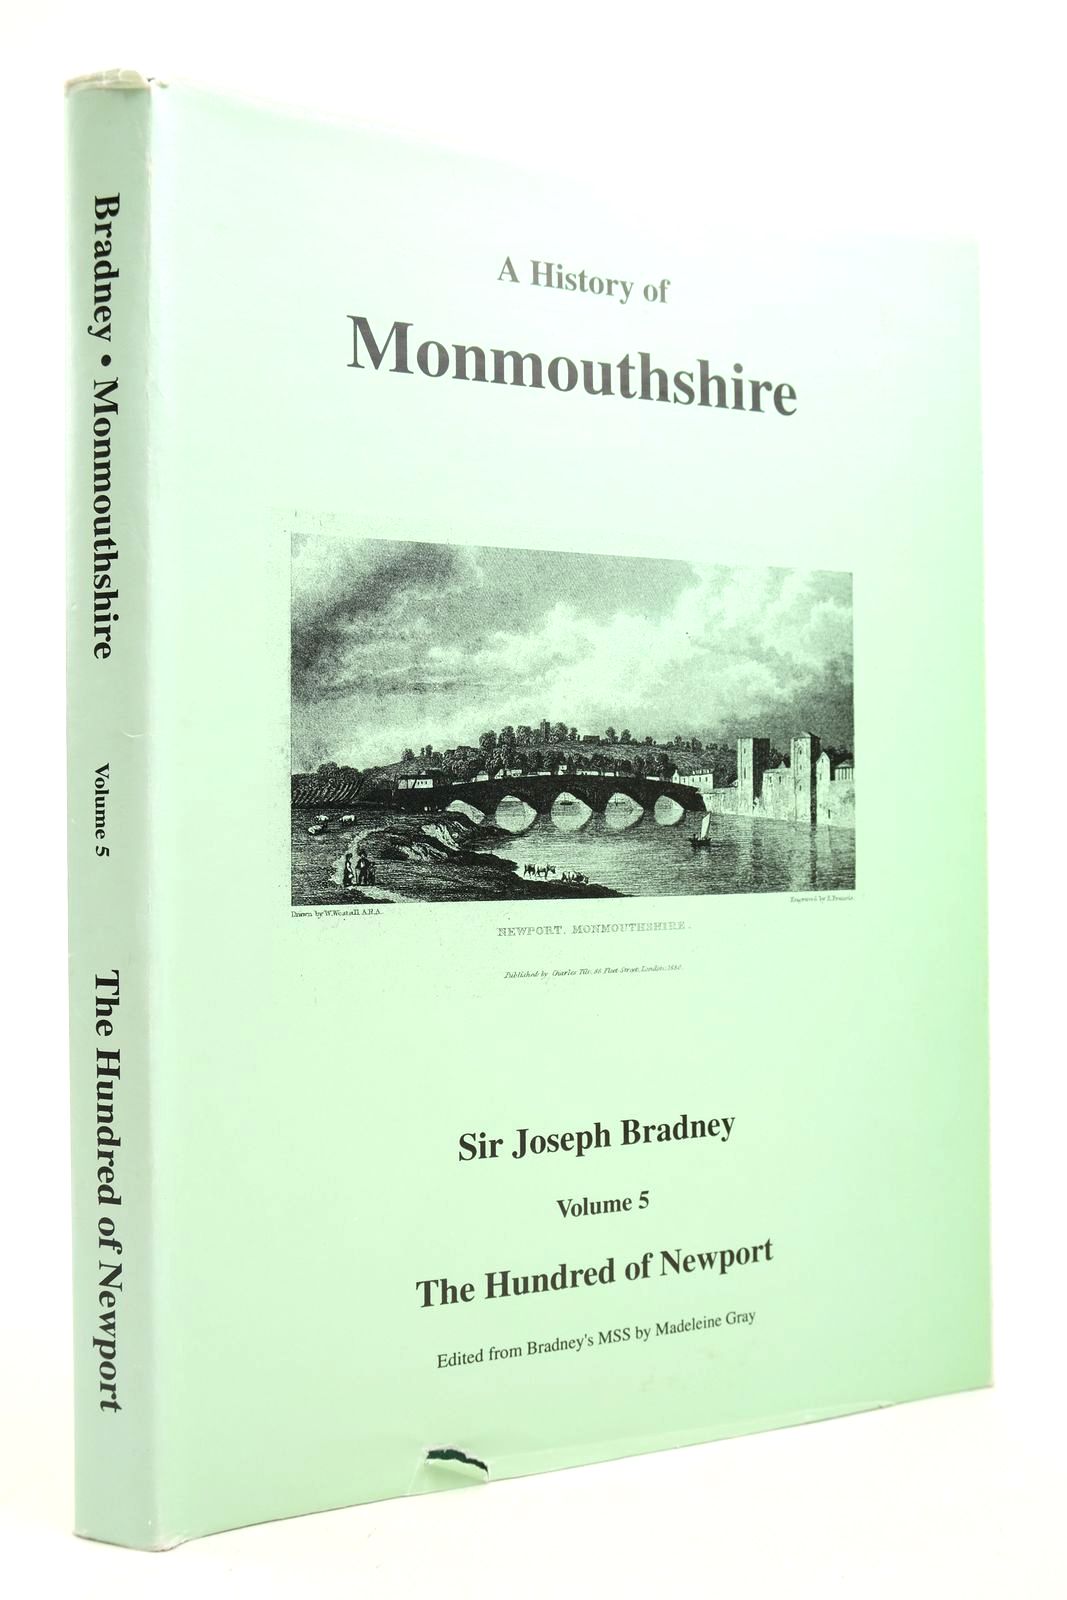 Photo of A HISTORY OF MONMOUTHSHIRE VOLUME 5 THE HUNDRED OF NEWPORT written by Bradney, Joseph published by South Wales Record Society (STOCK CODE: 2140574)  for sale by Stella & Rose's Books